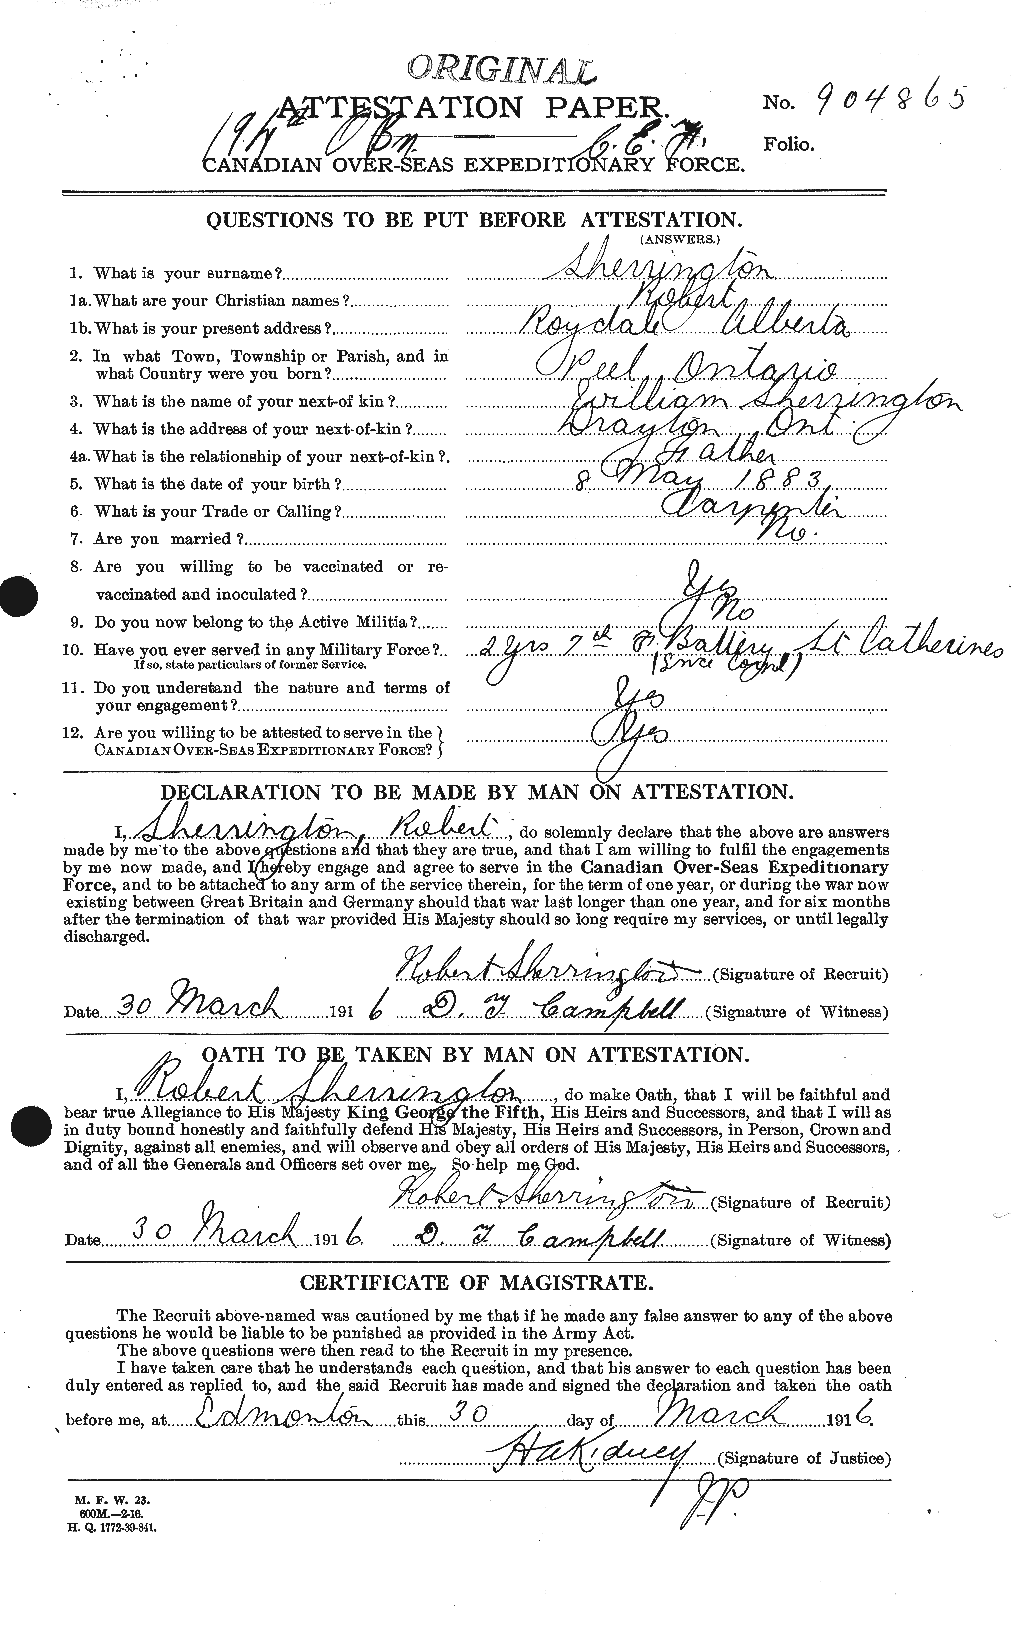 Personnel Records of the First World War - CEF 092373a